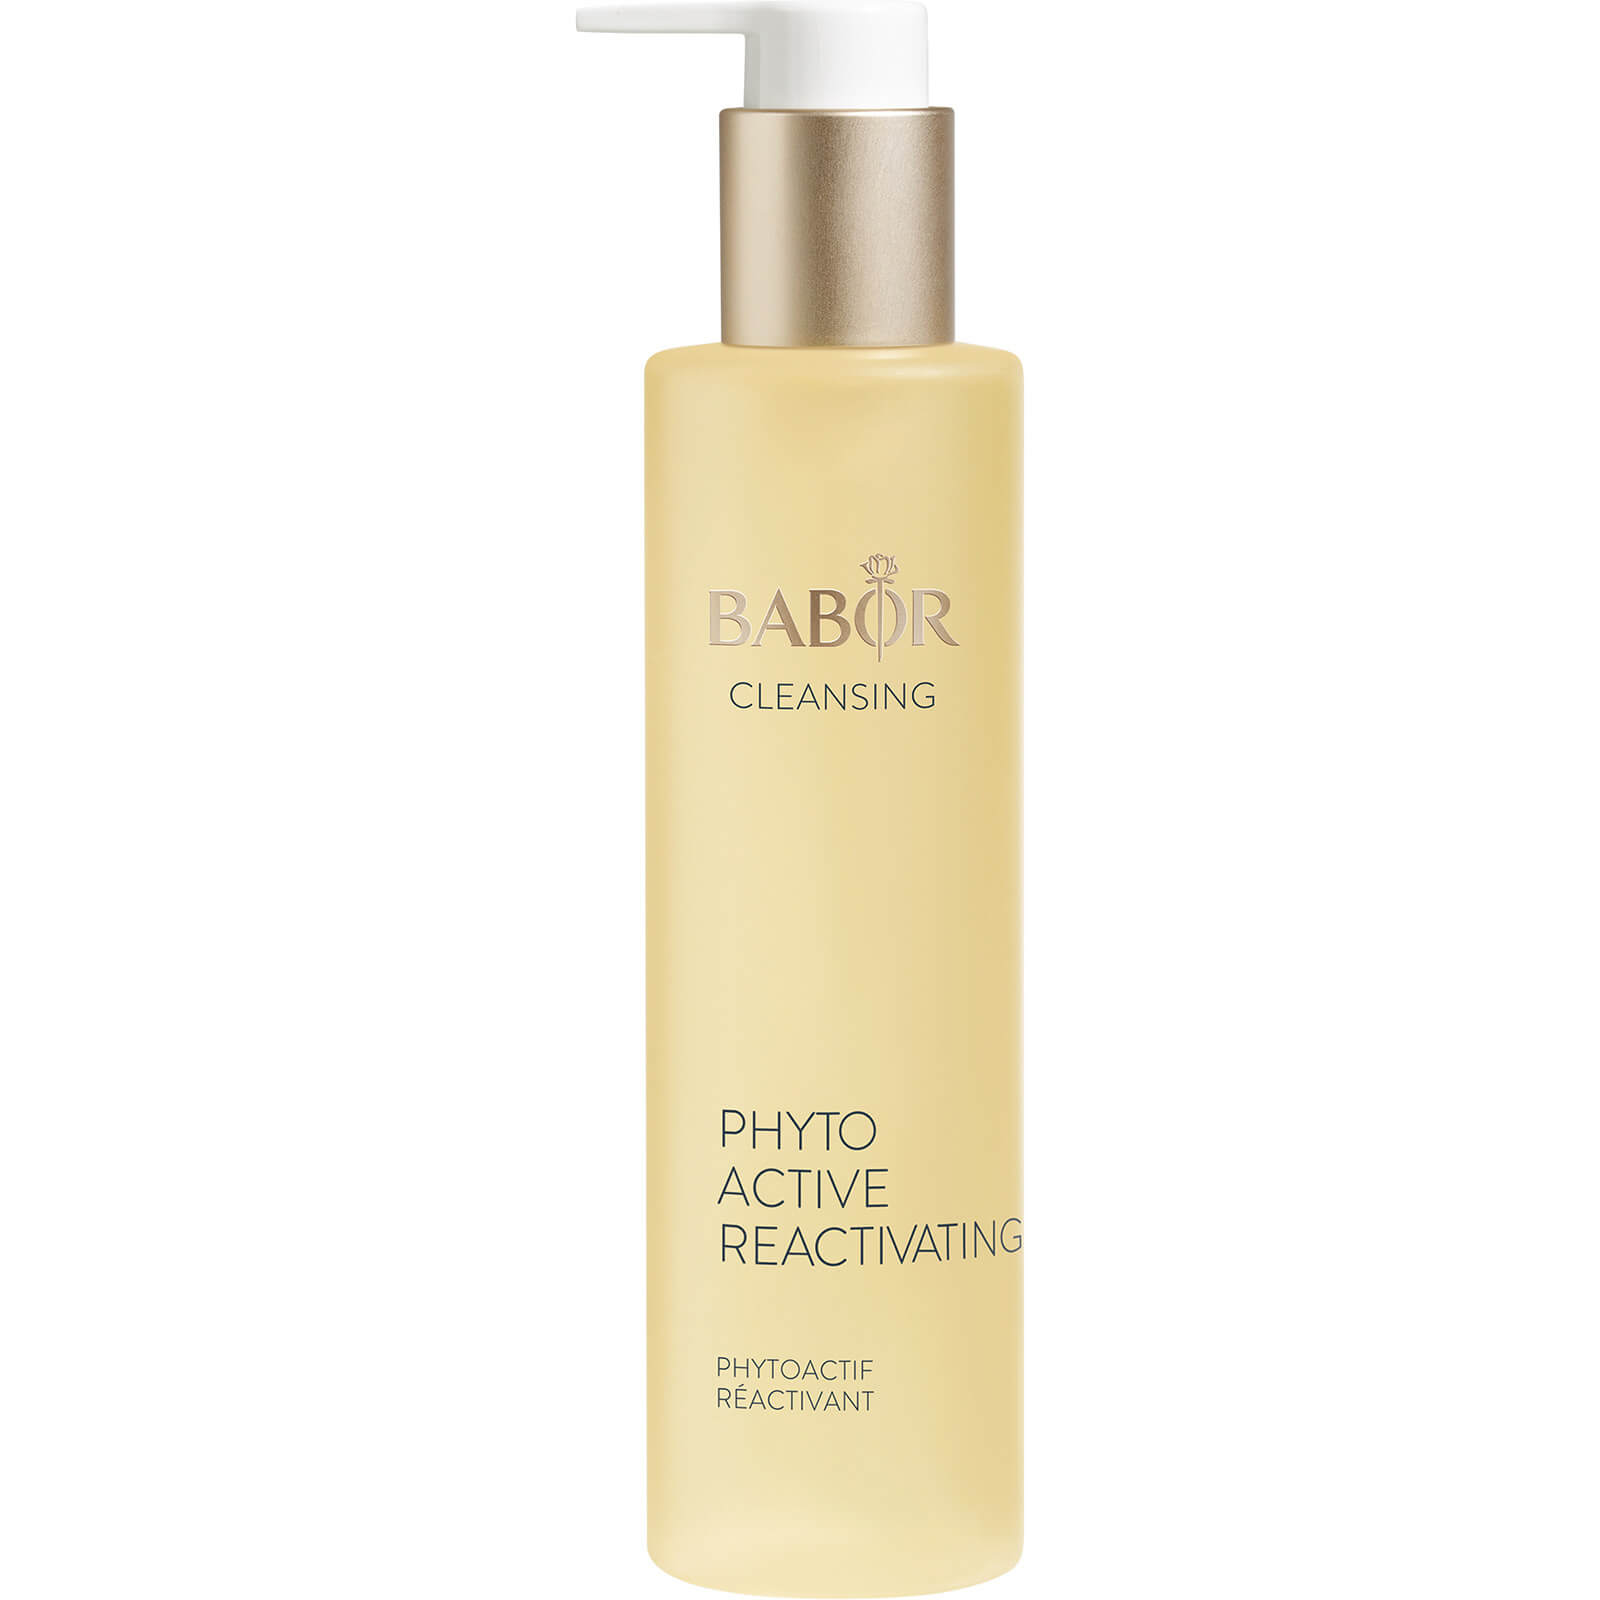 BABOR Cleansing Phytoactive – Reactivating 100ml lookfantastic.com imagine